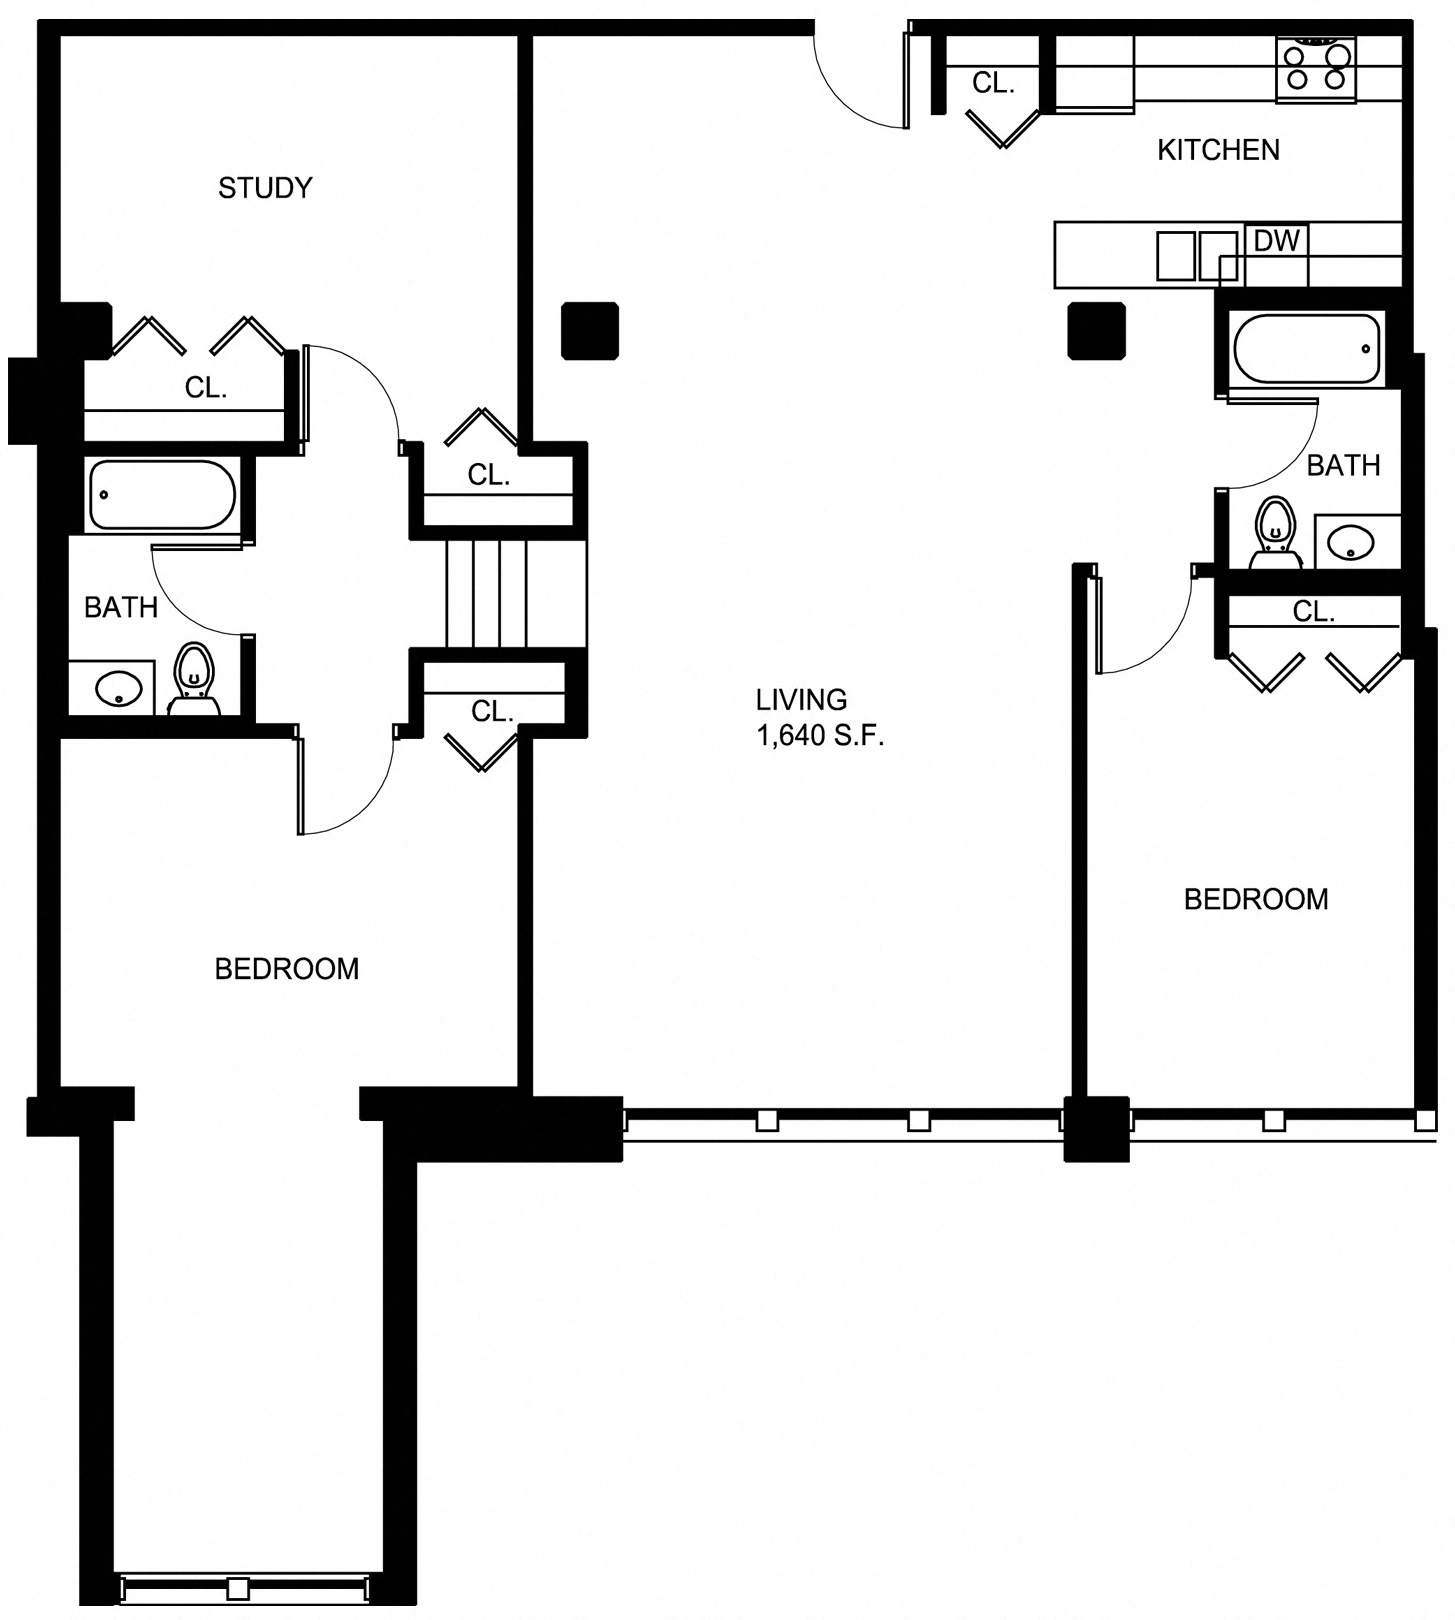 Floorplan for Apartment #P410, 2 bedroom unit at Halstead Providence